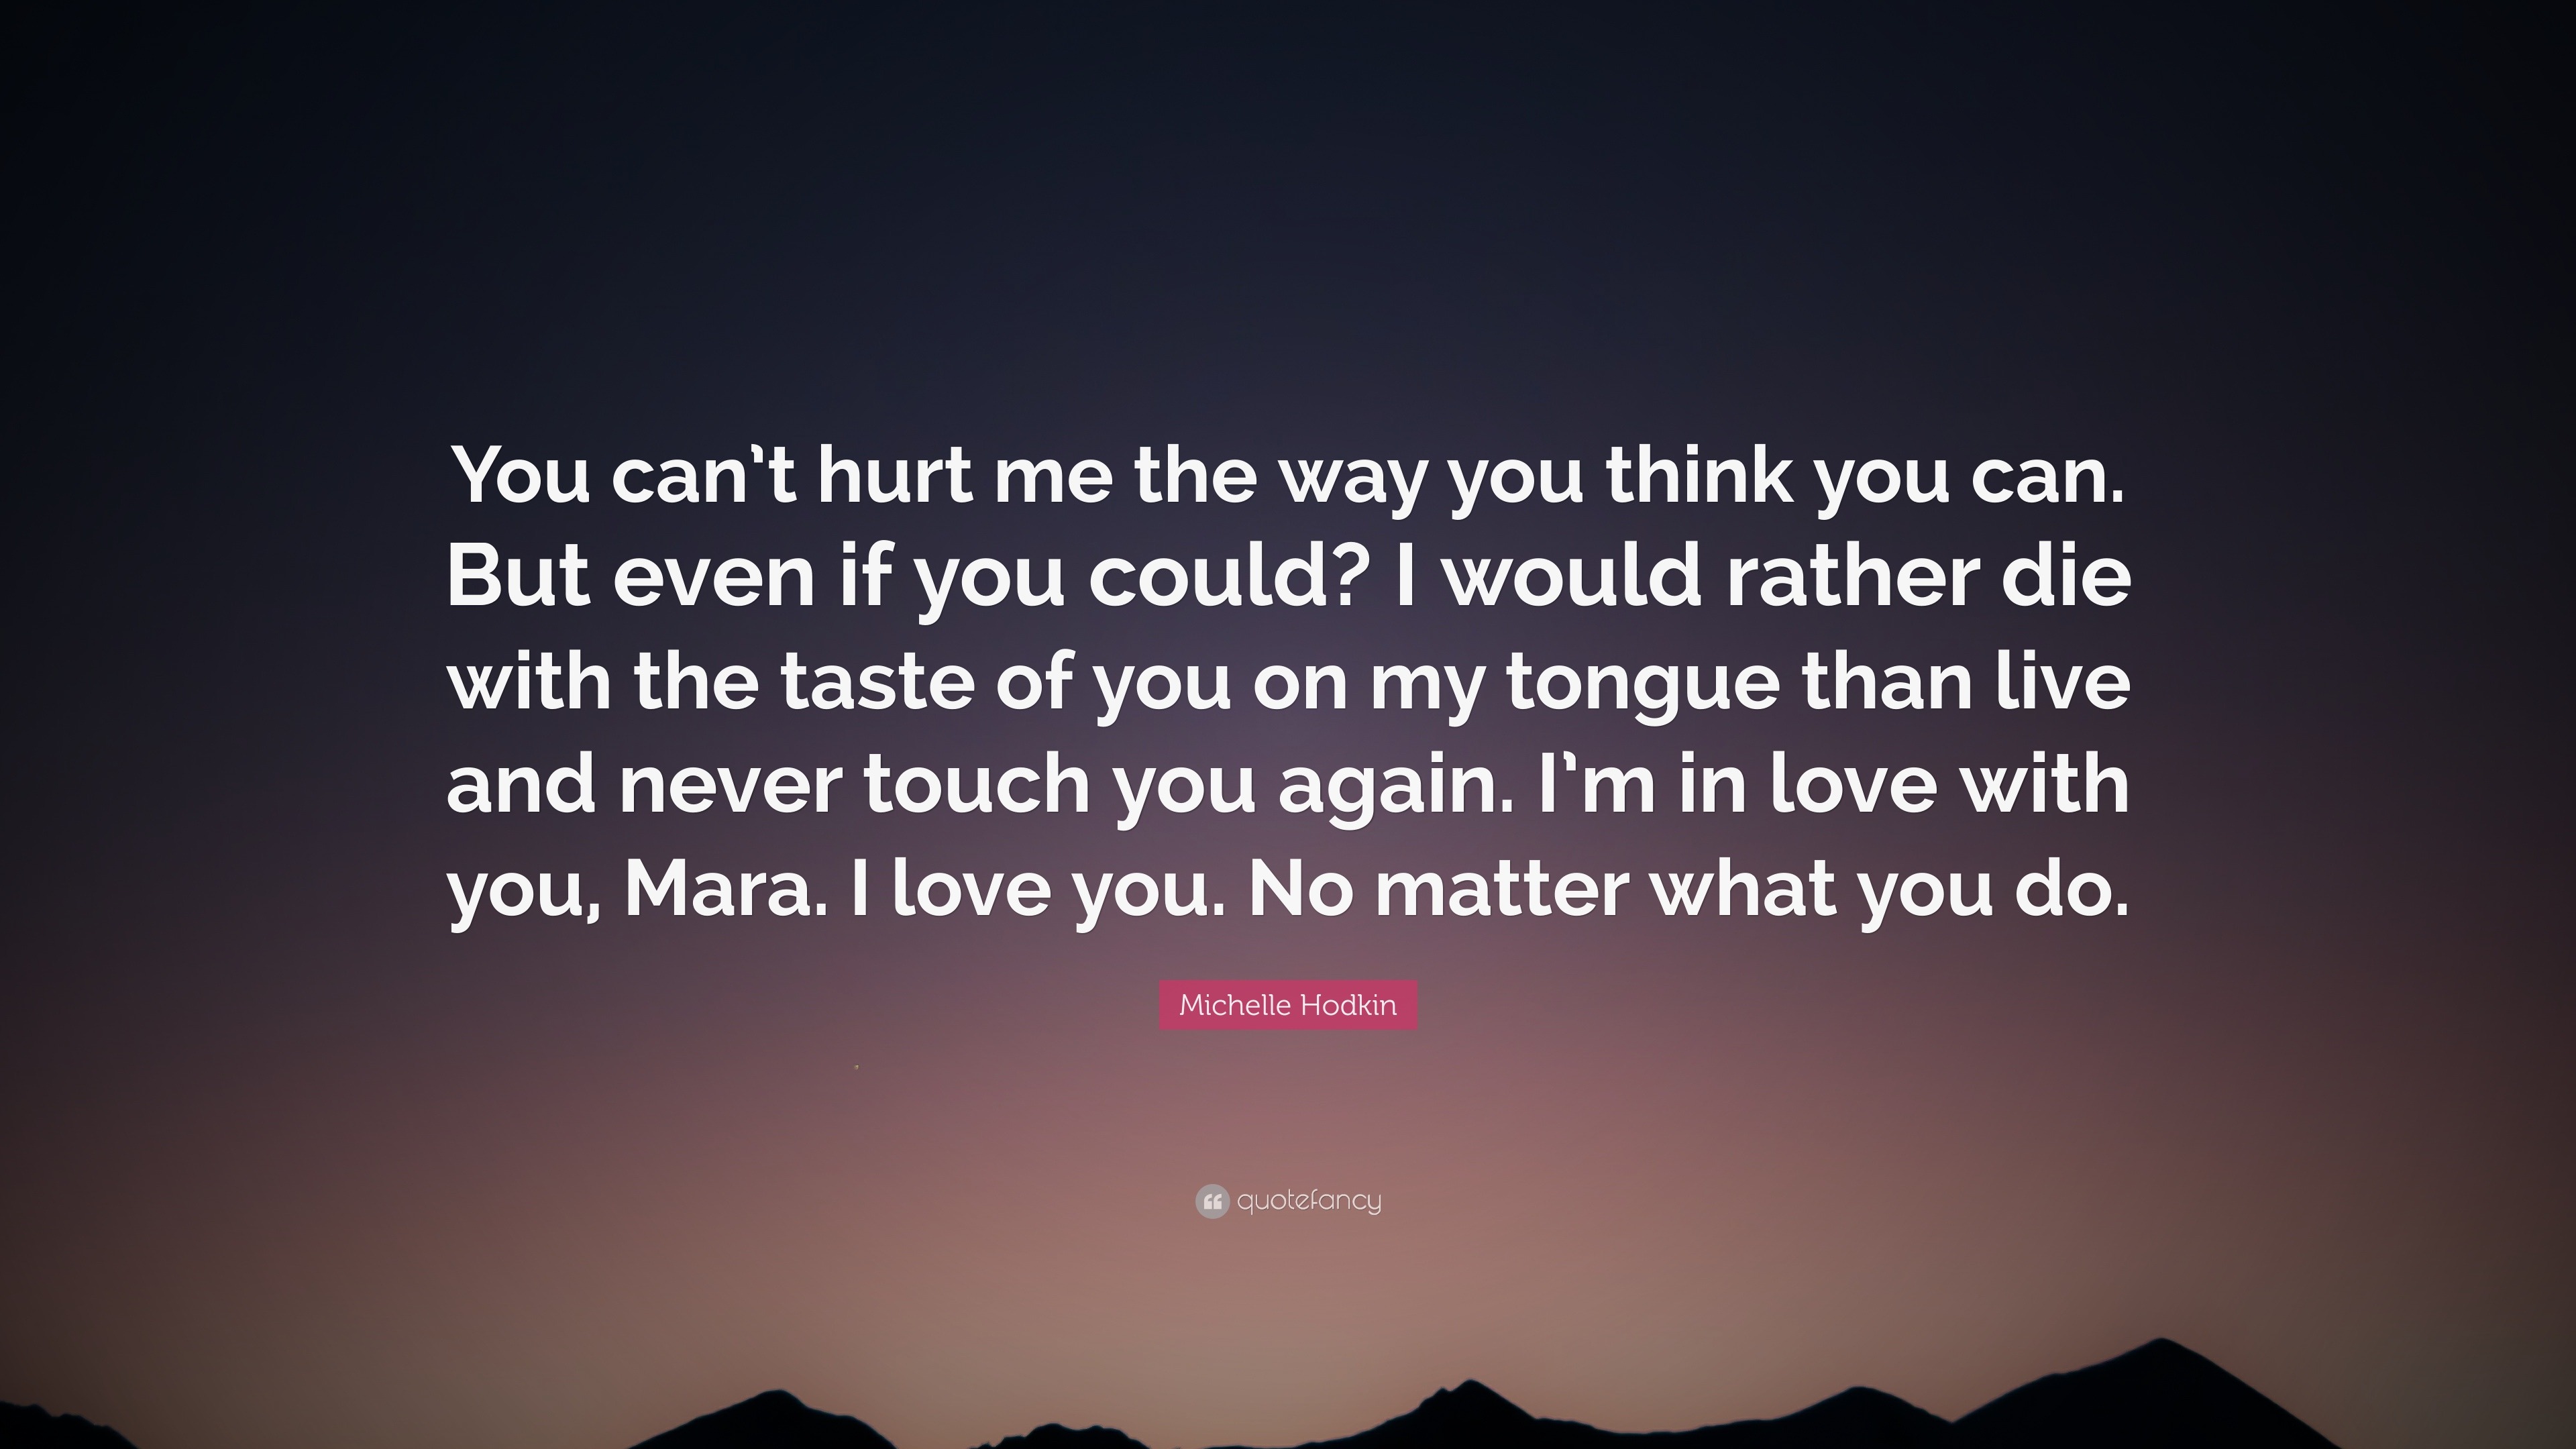 Michelle Hodkin Quote “You can t hurt me the way you think you